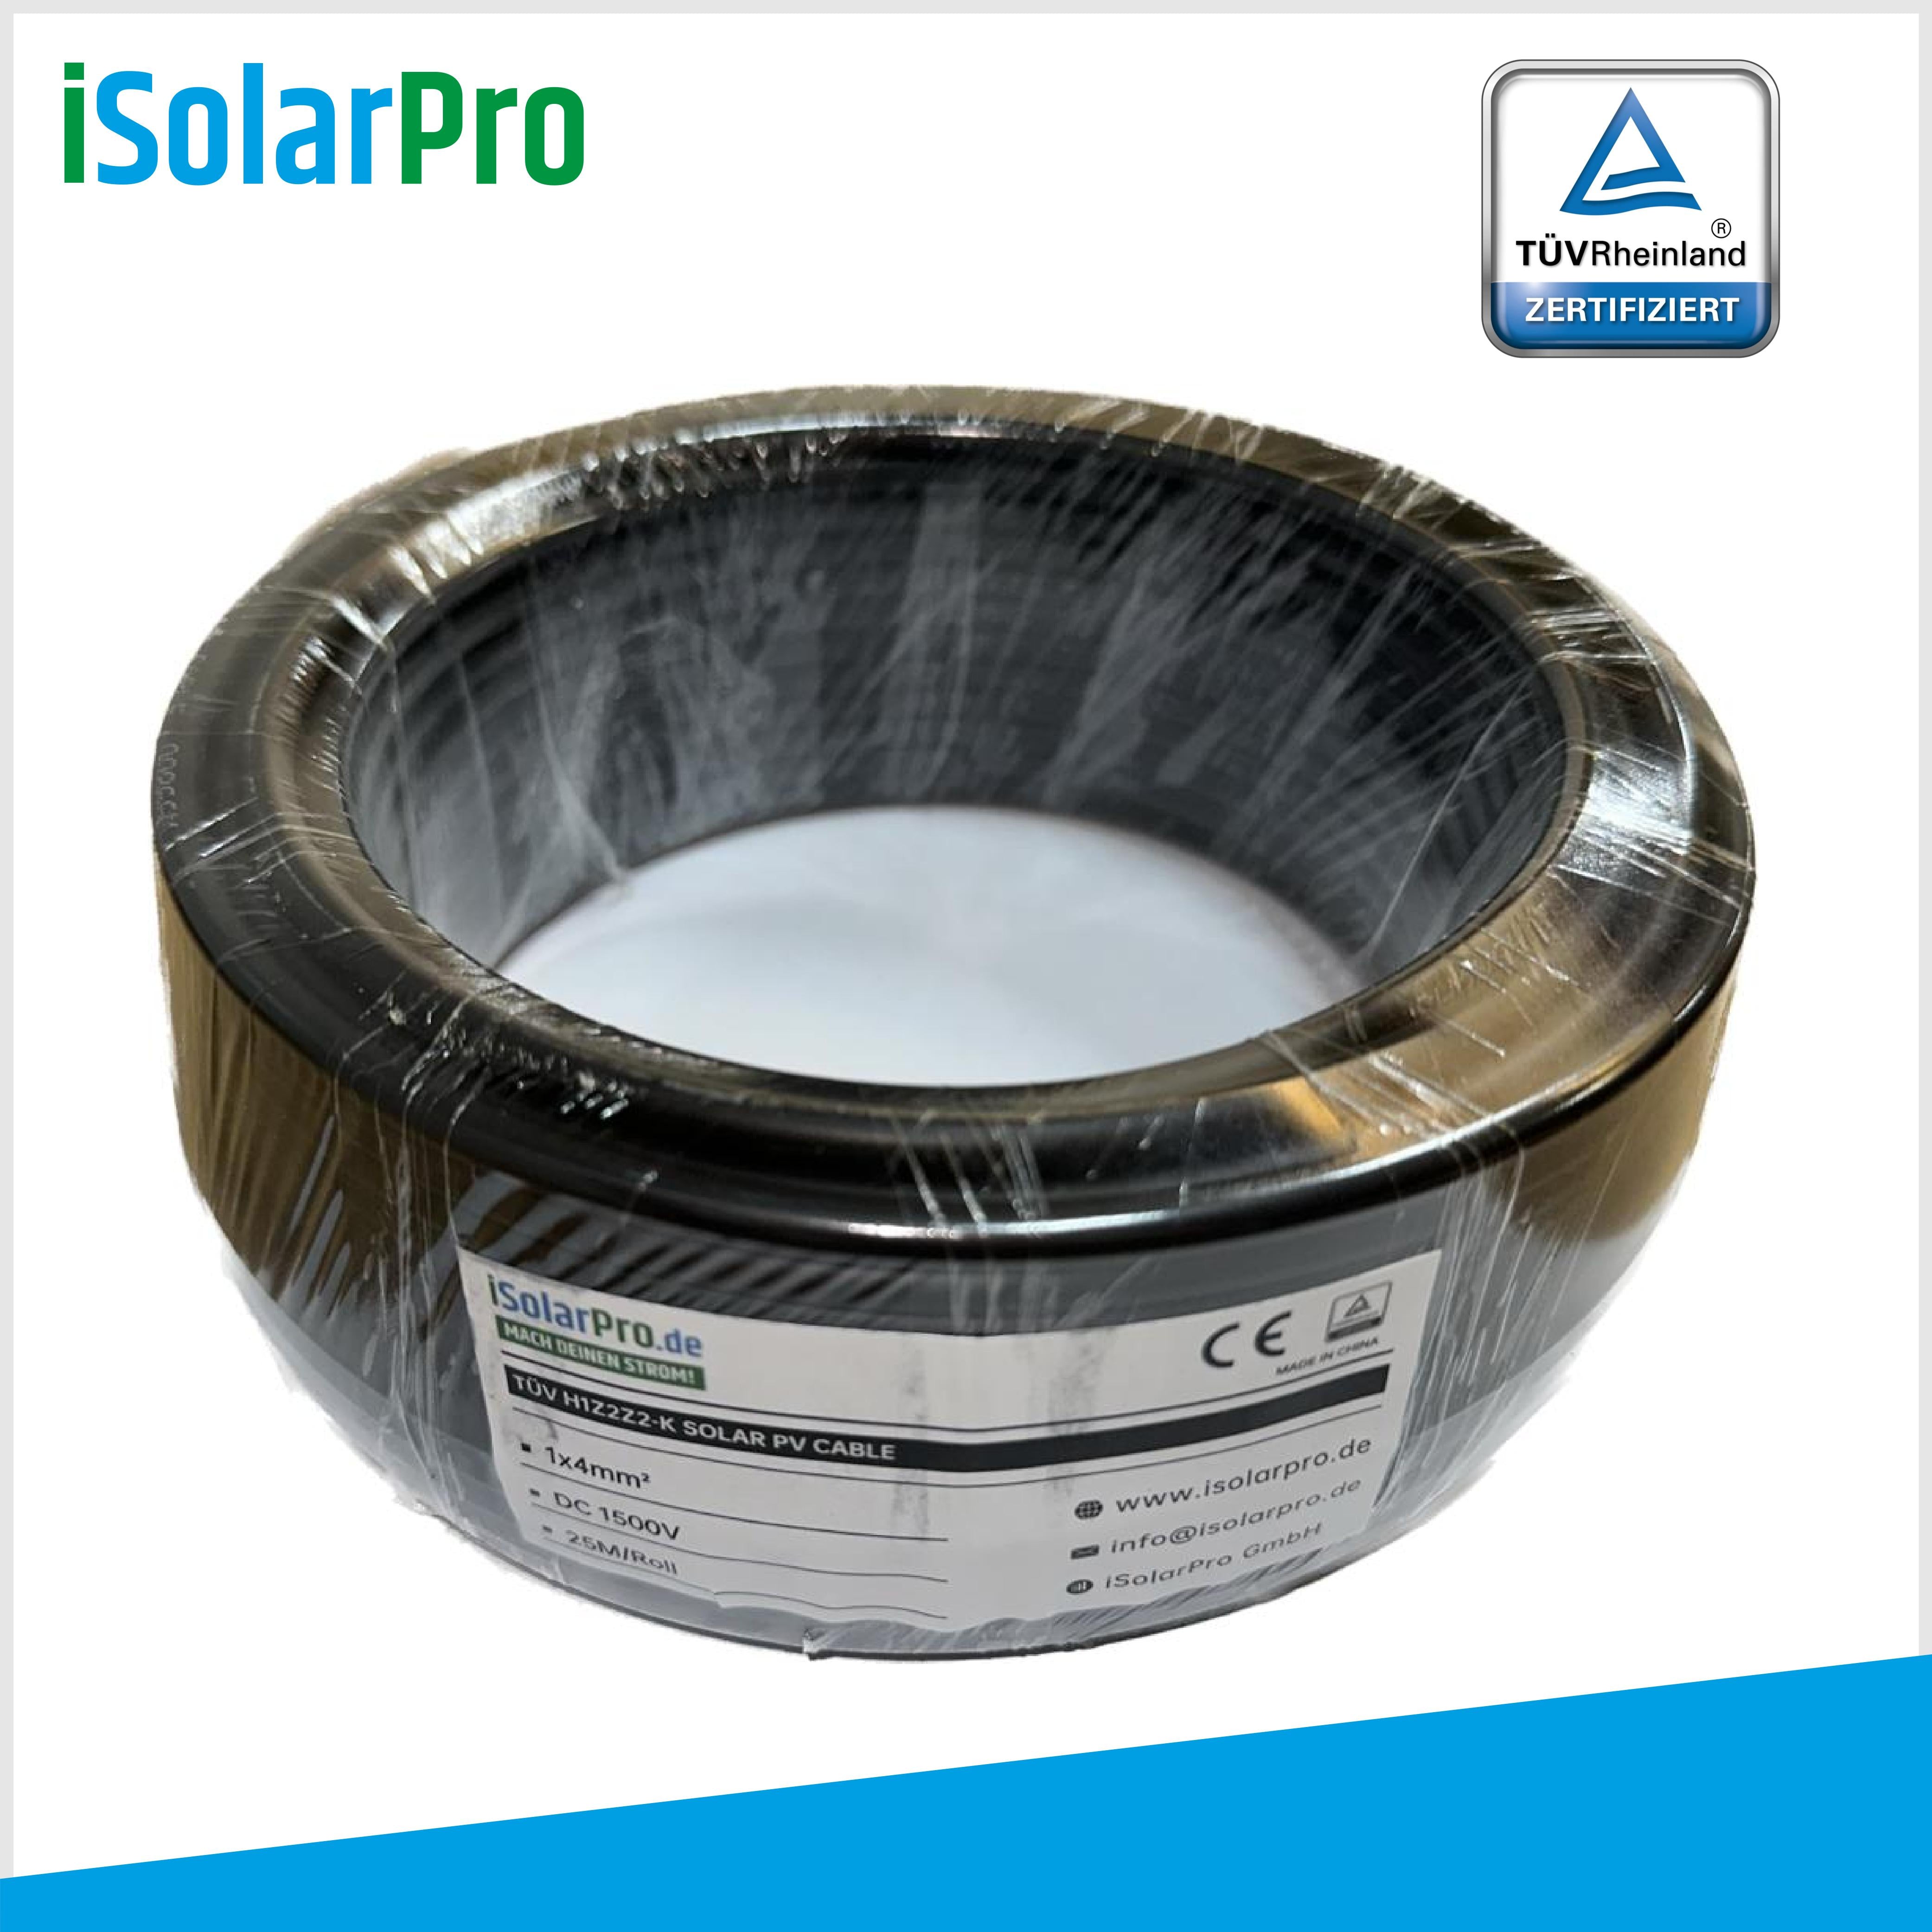 25m solar cable 4 mm² photovoltaic cable for PV systems black